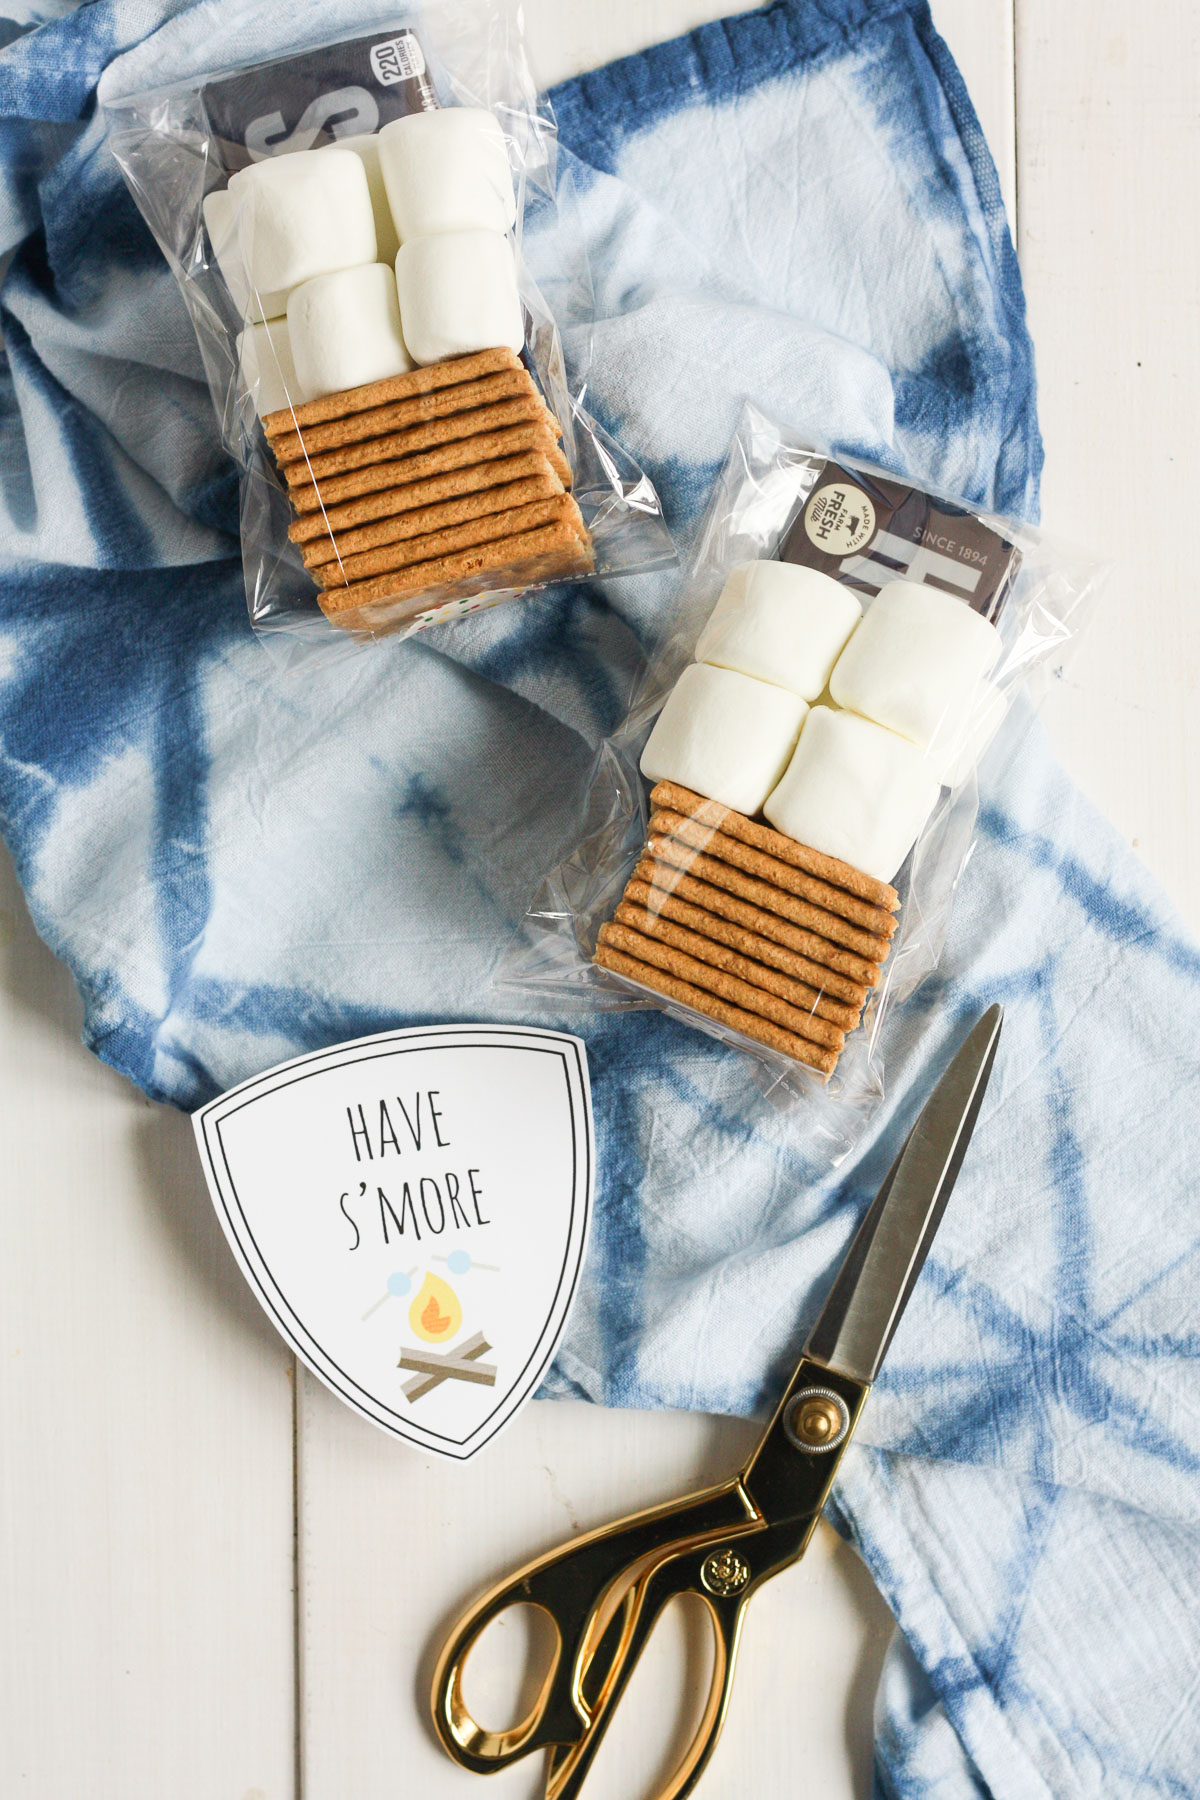 spread s'more love this summer by making these cute DIY s'mores kits for friends, family, and neighbors!